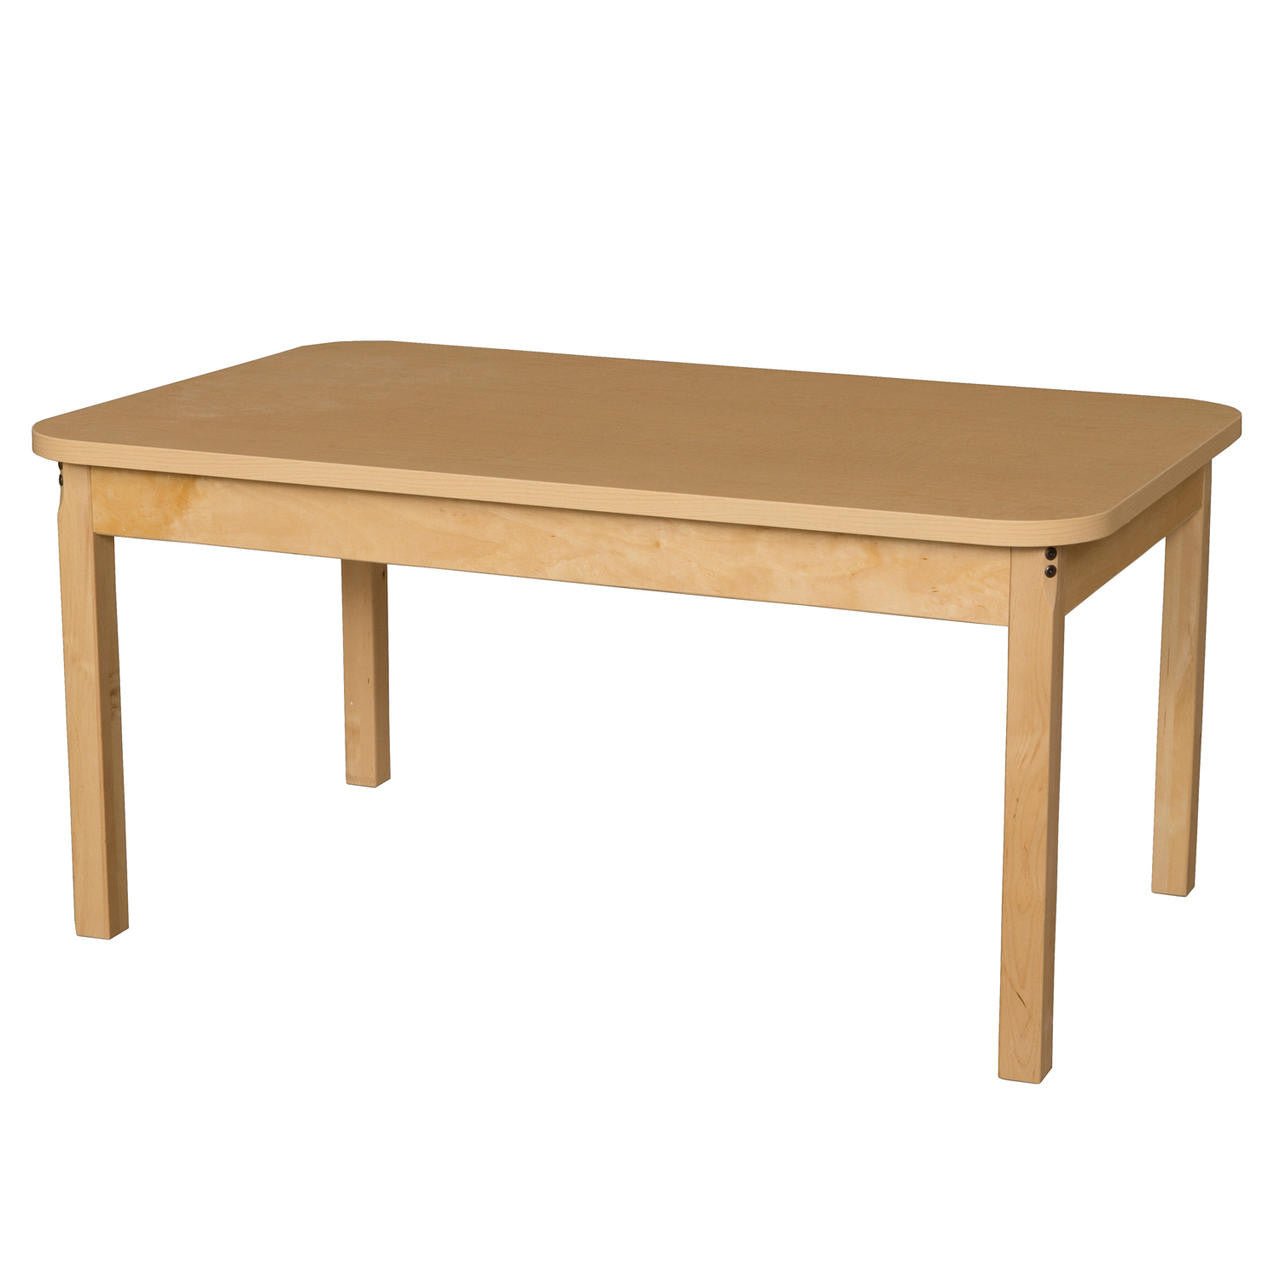 Rectangle High Pressure Laminate Table with Hardwood Legs- 18"